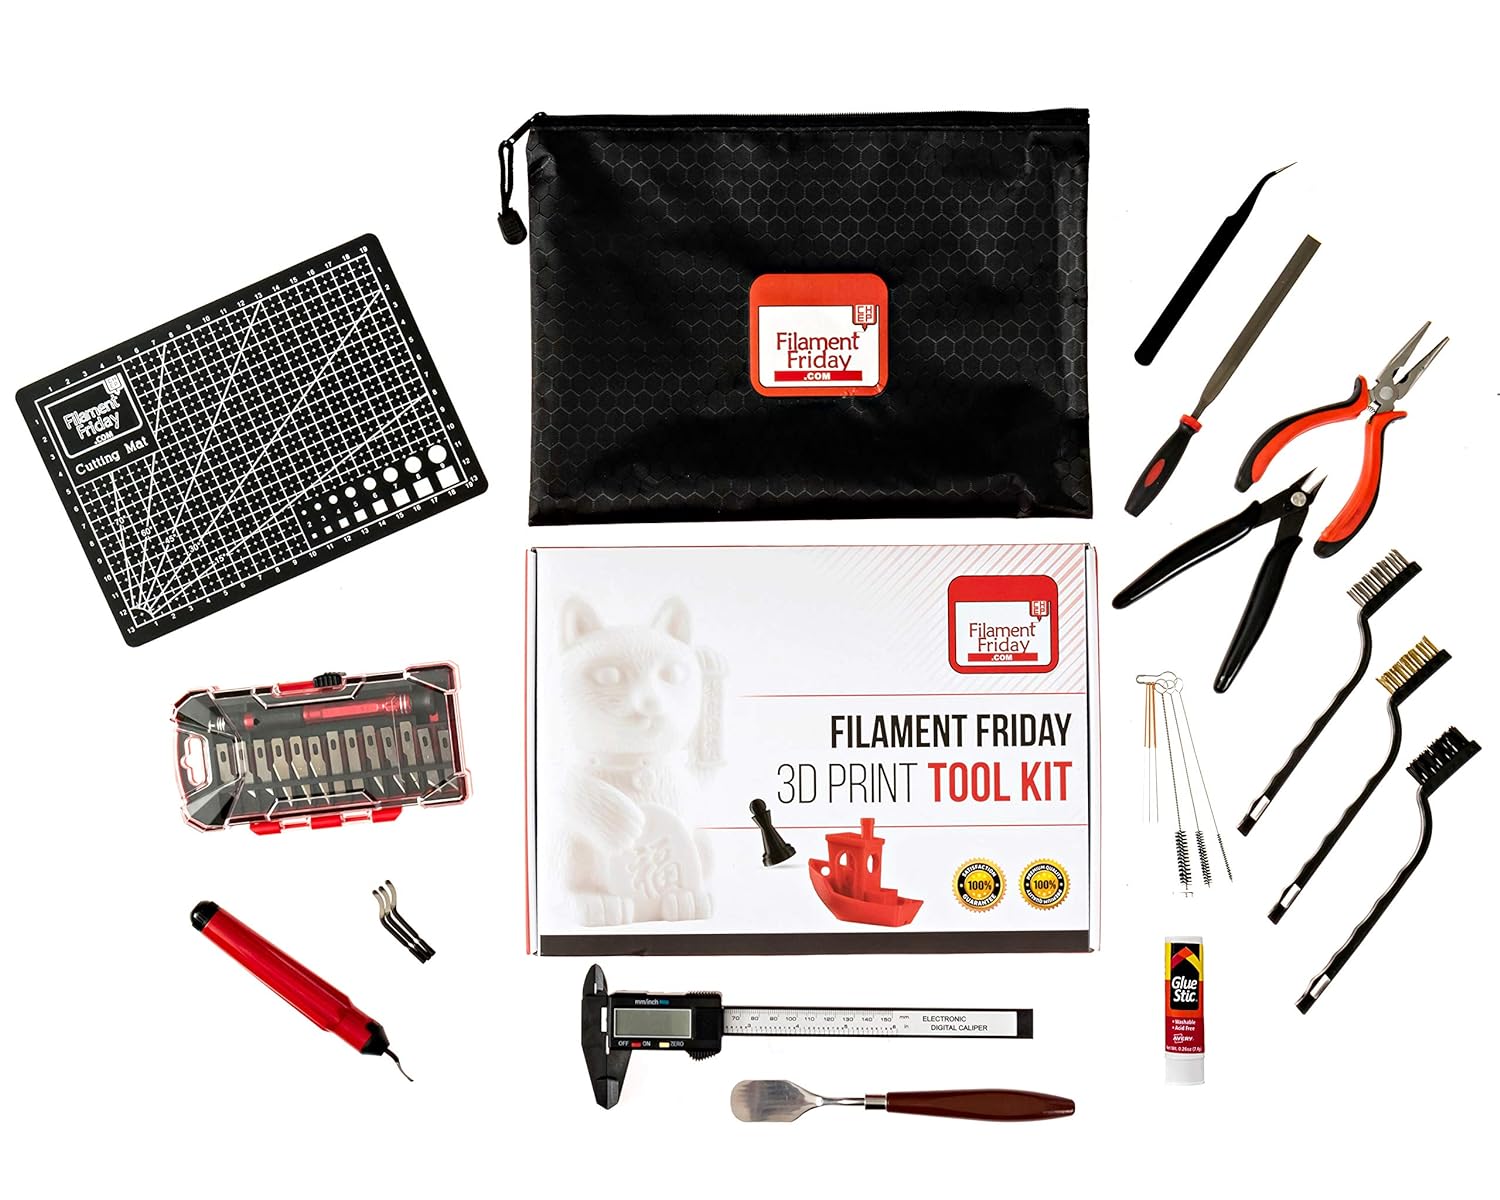 3d-print-tool-kit-38-essential-3d-print-accessories-for-finishing-cleaning-printing-removal-tool-included-3d-print-tool- 3D Print Tool Kit Review